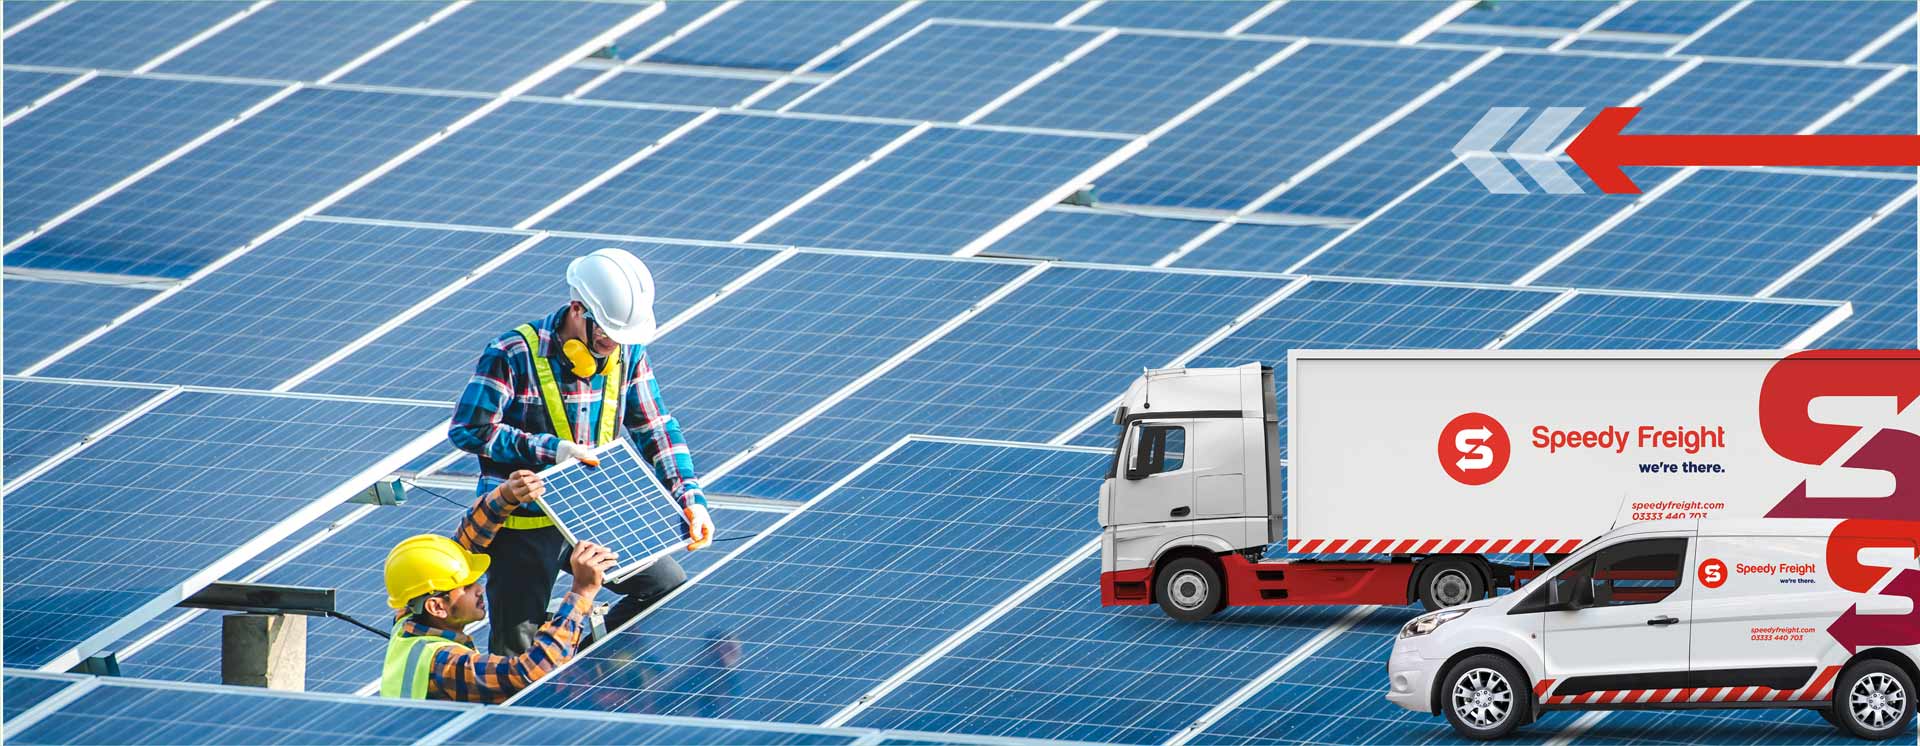 Same Day Transport of Solar Panels: A Case Study